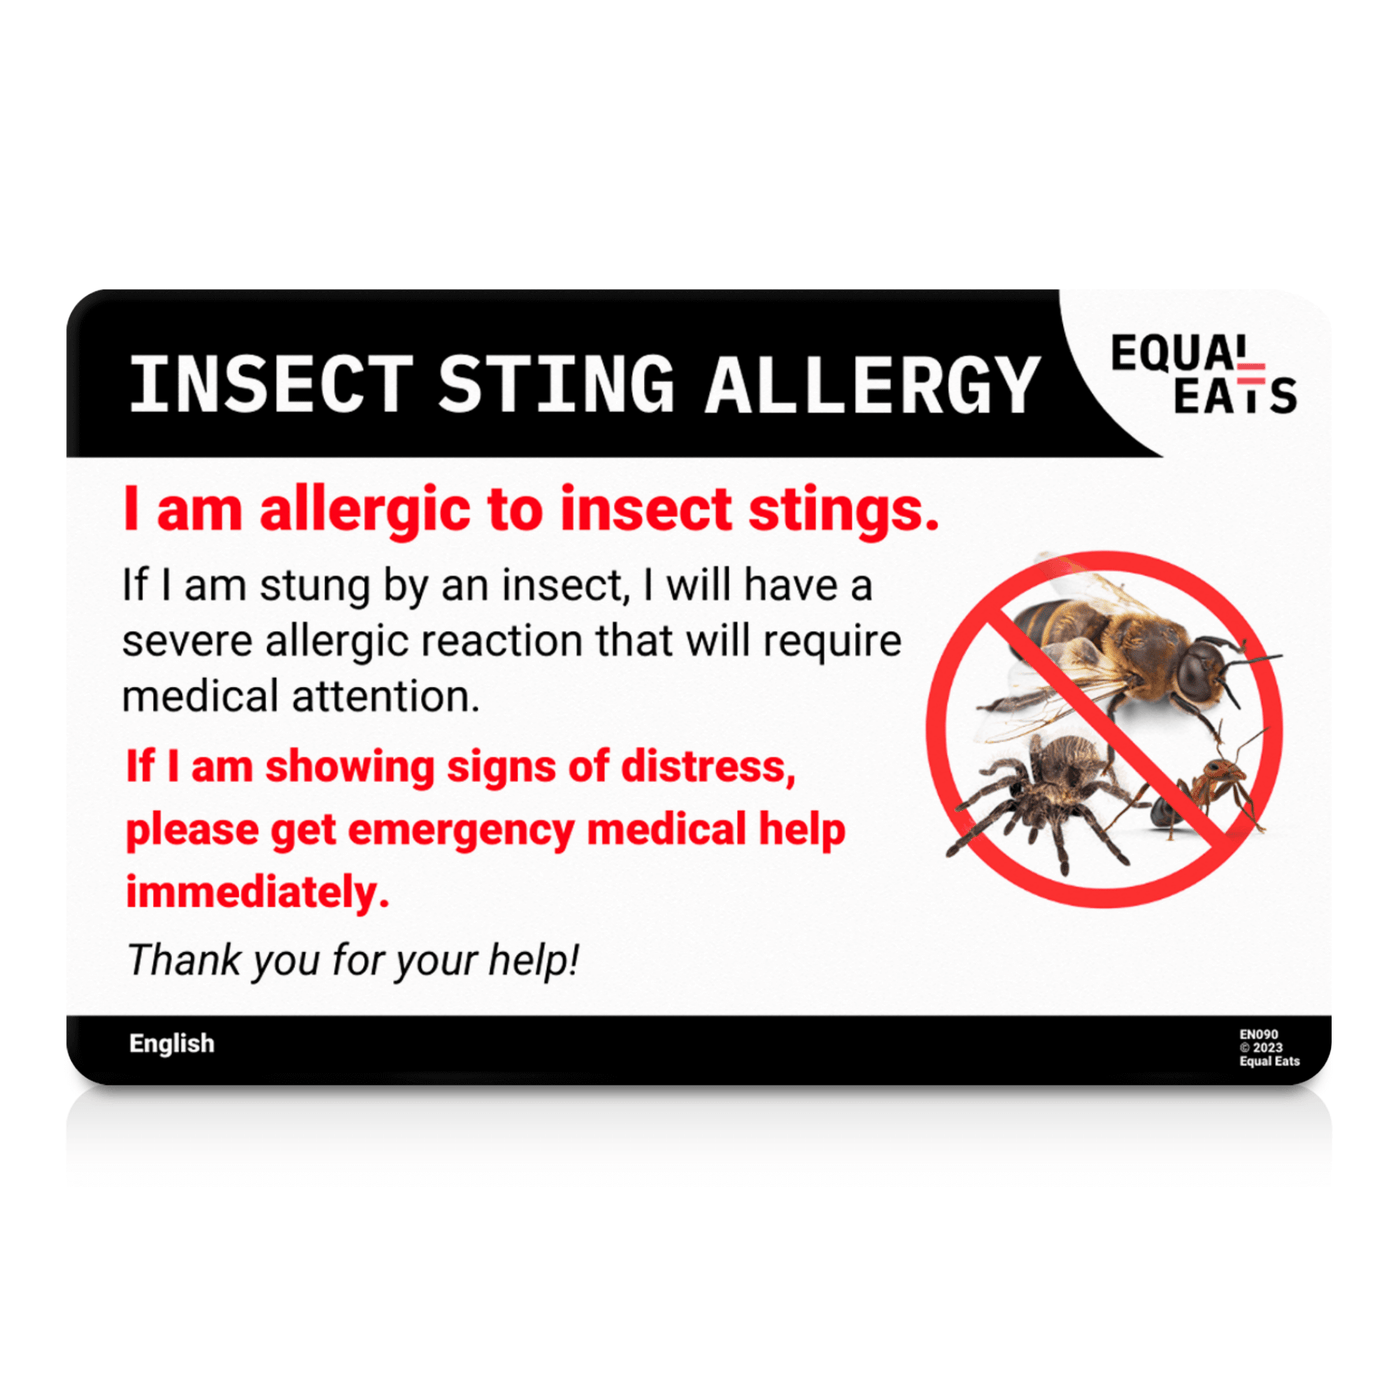 Indonesian Insect Sting Allergy Card